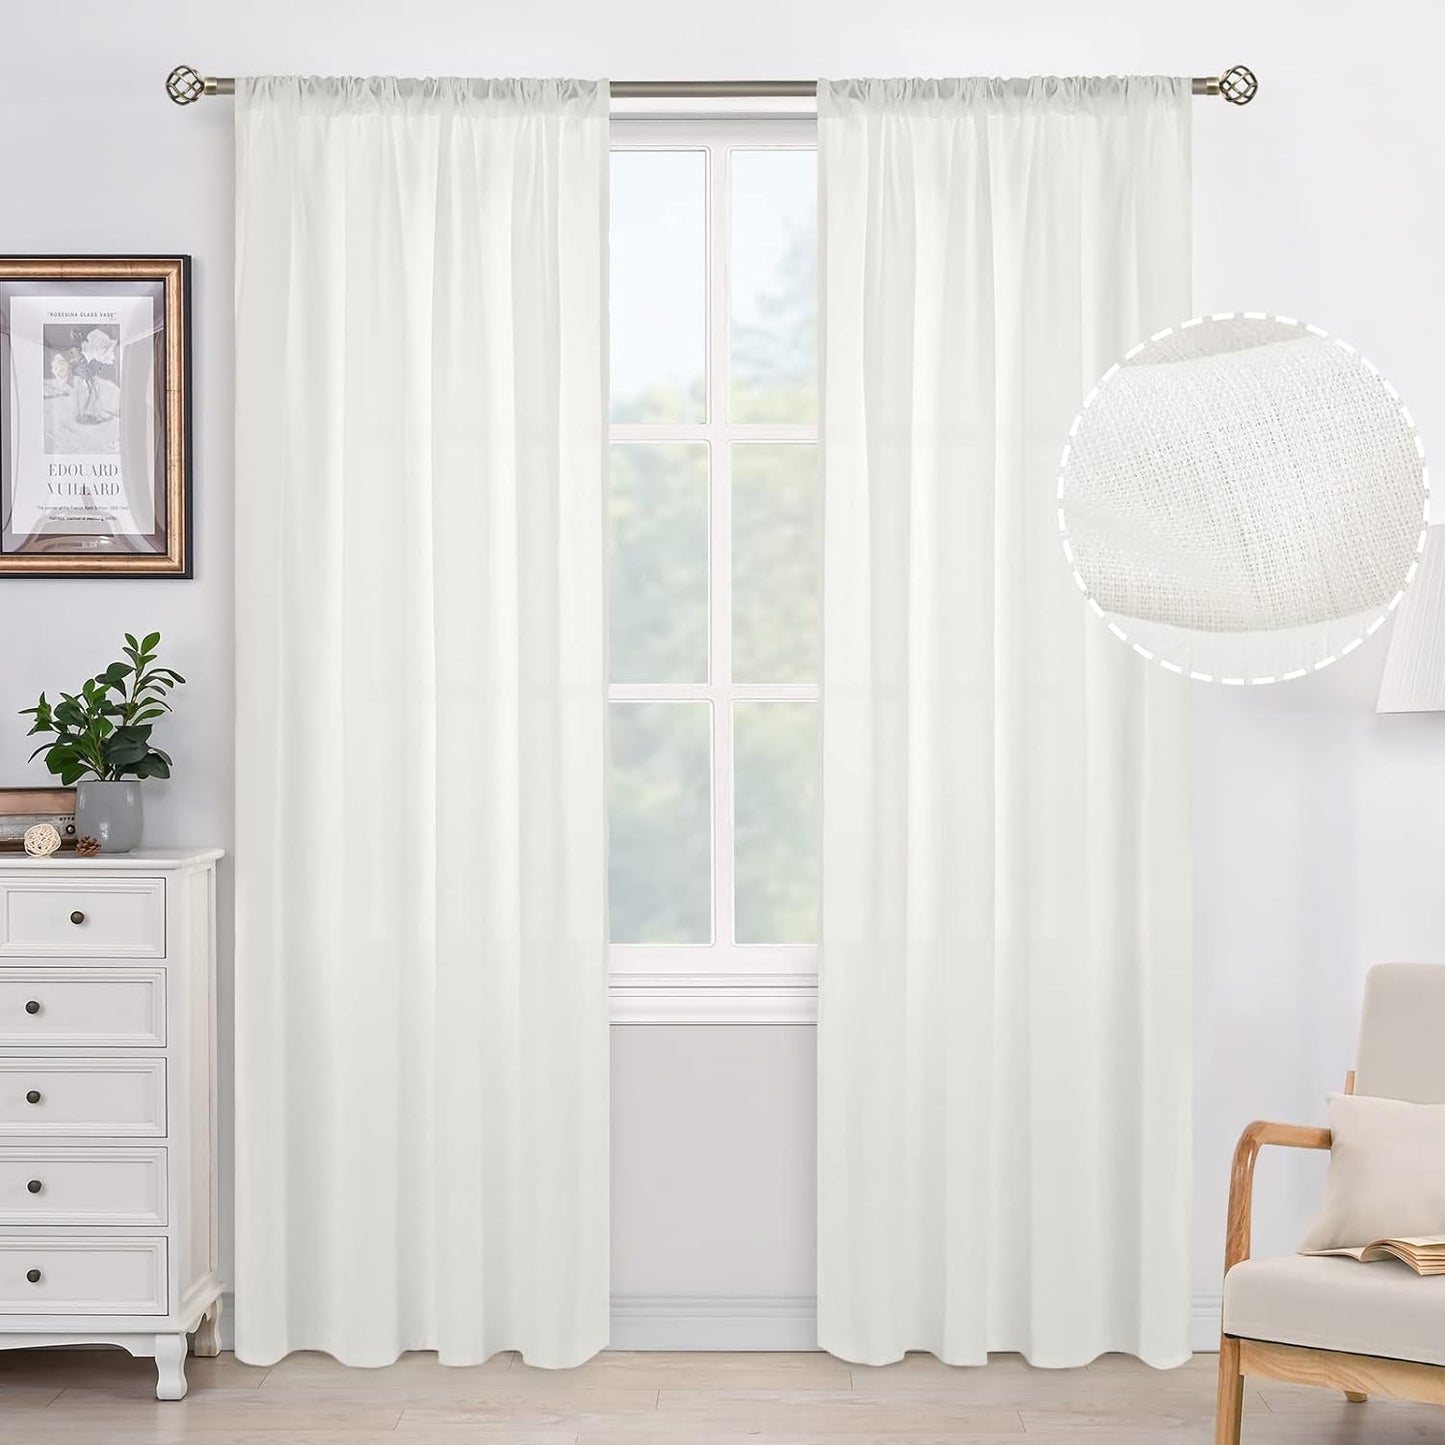 Bgment White Semi Sheer Curtains 95 Inch for Bedroom, Linen Look Rod Pocket Light Filtering Privacy Sheer Curtains for Living Room, Opaque White Sheer Curtains 2 Panels, Each 42 X 95 Inch  BGment Ivory Cream 42W X 84L 